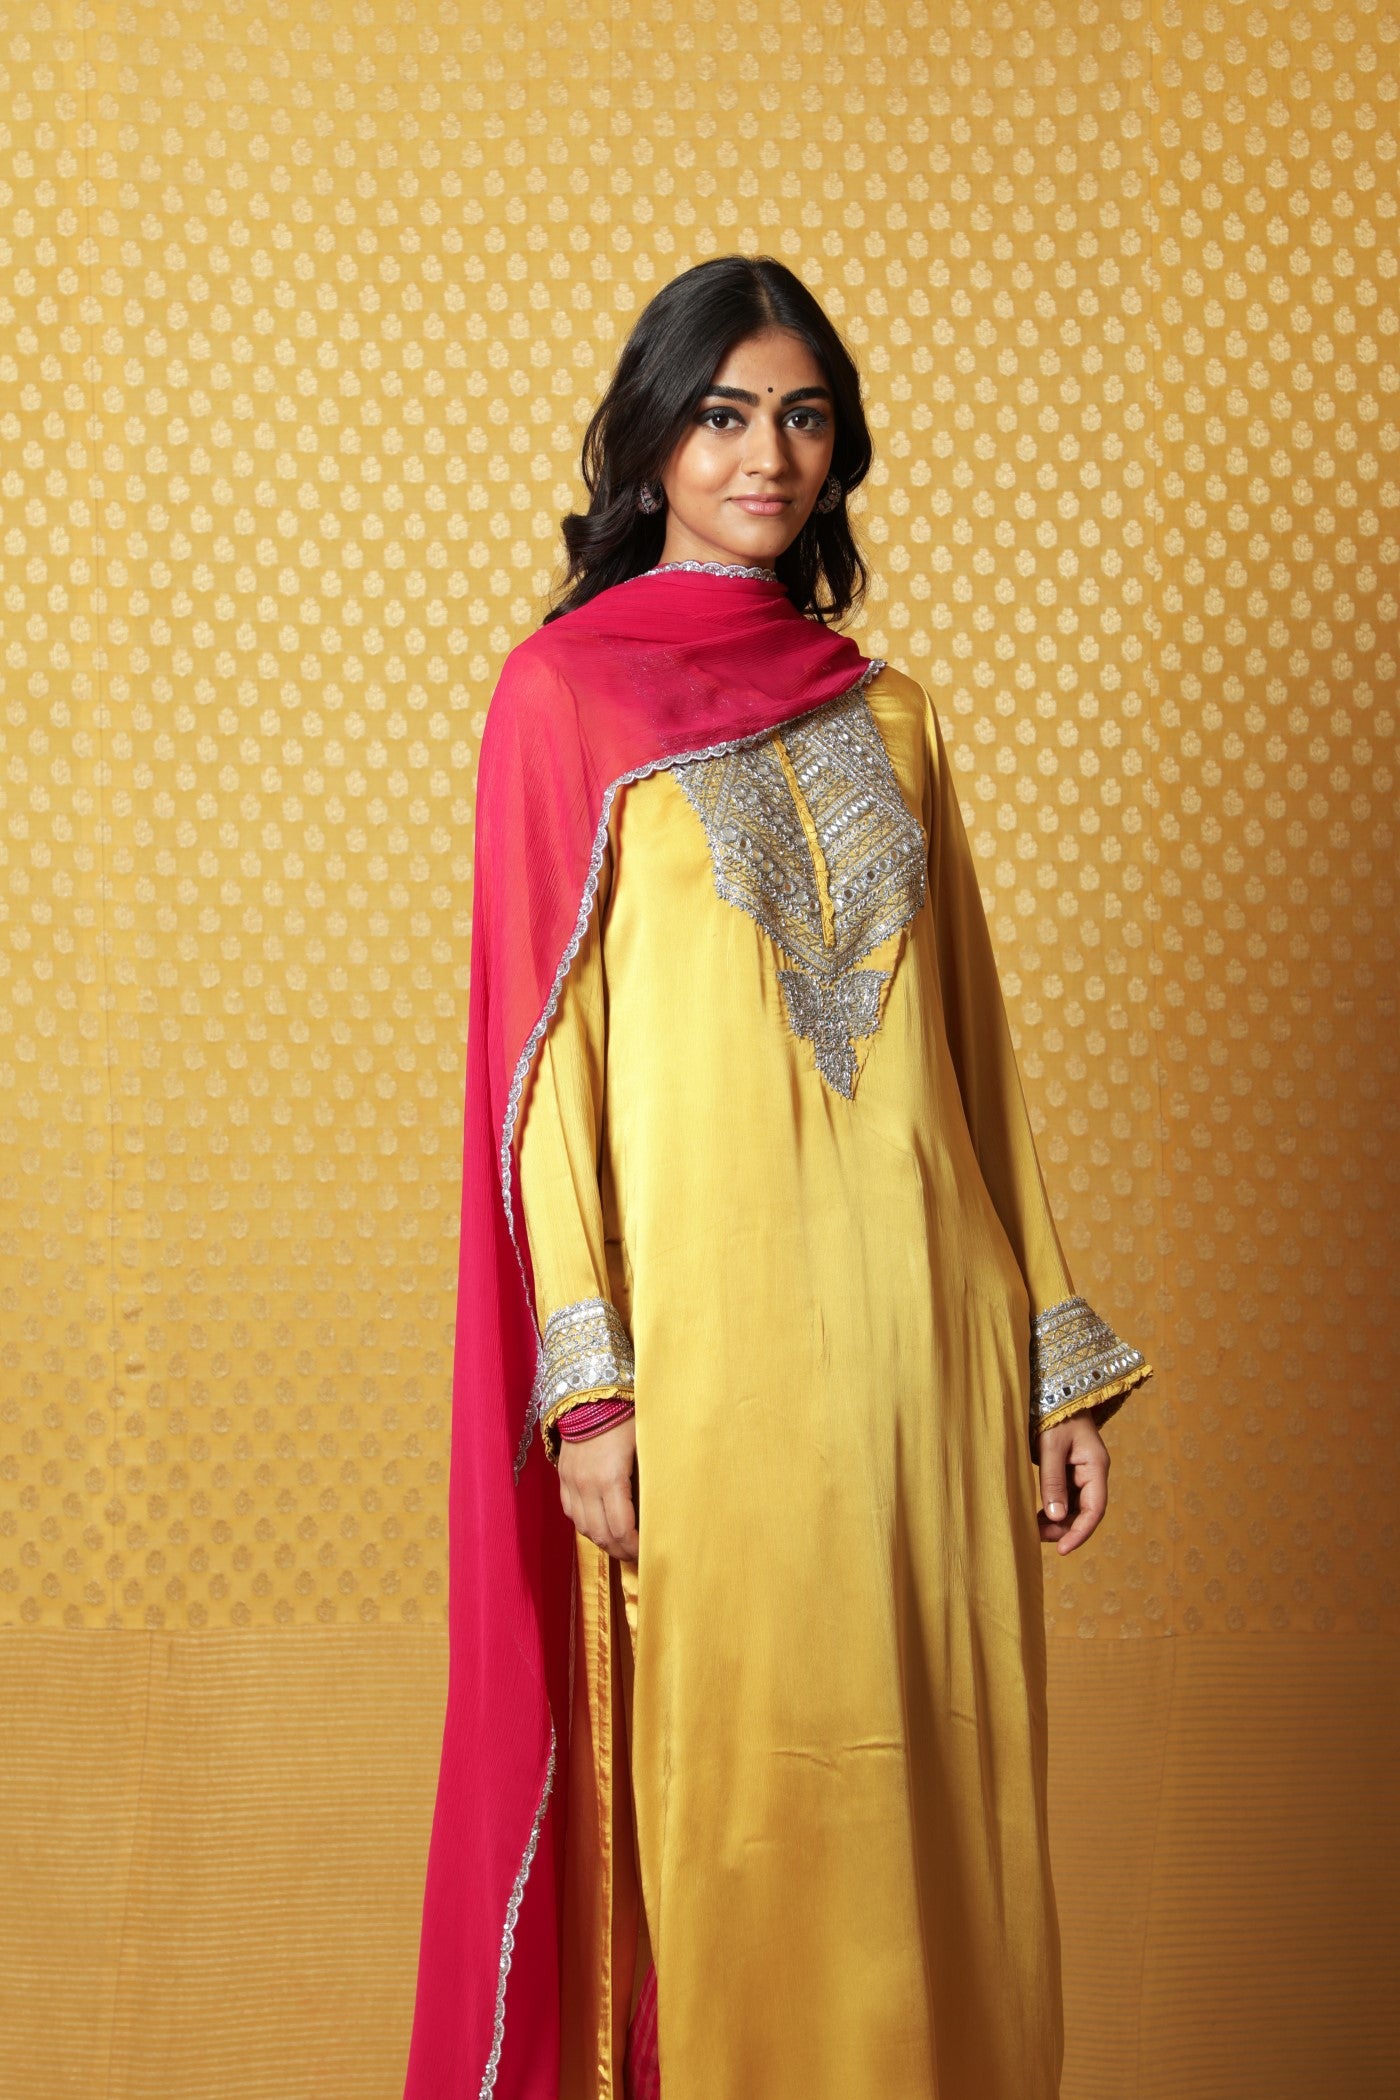 Mustard Hand-Embroidered Satin Kurta Paired With Pink Dupatta And Pink Pants